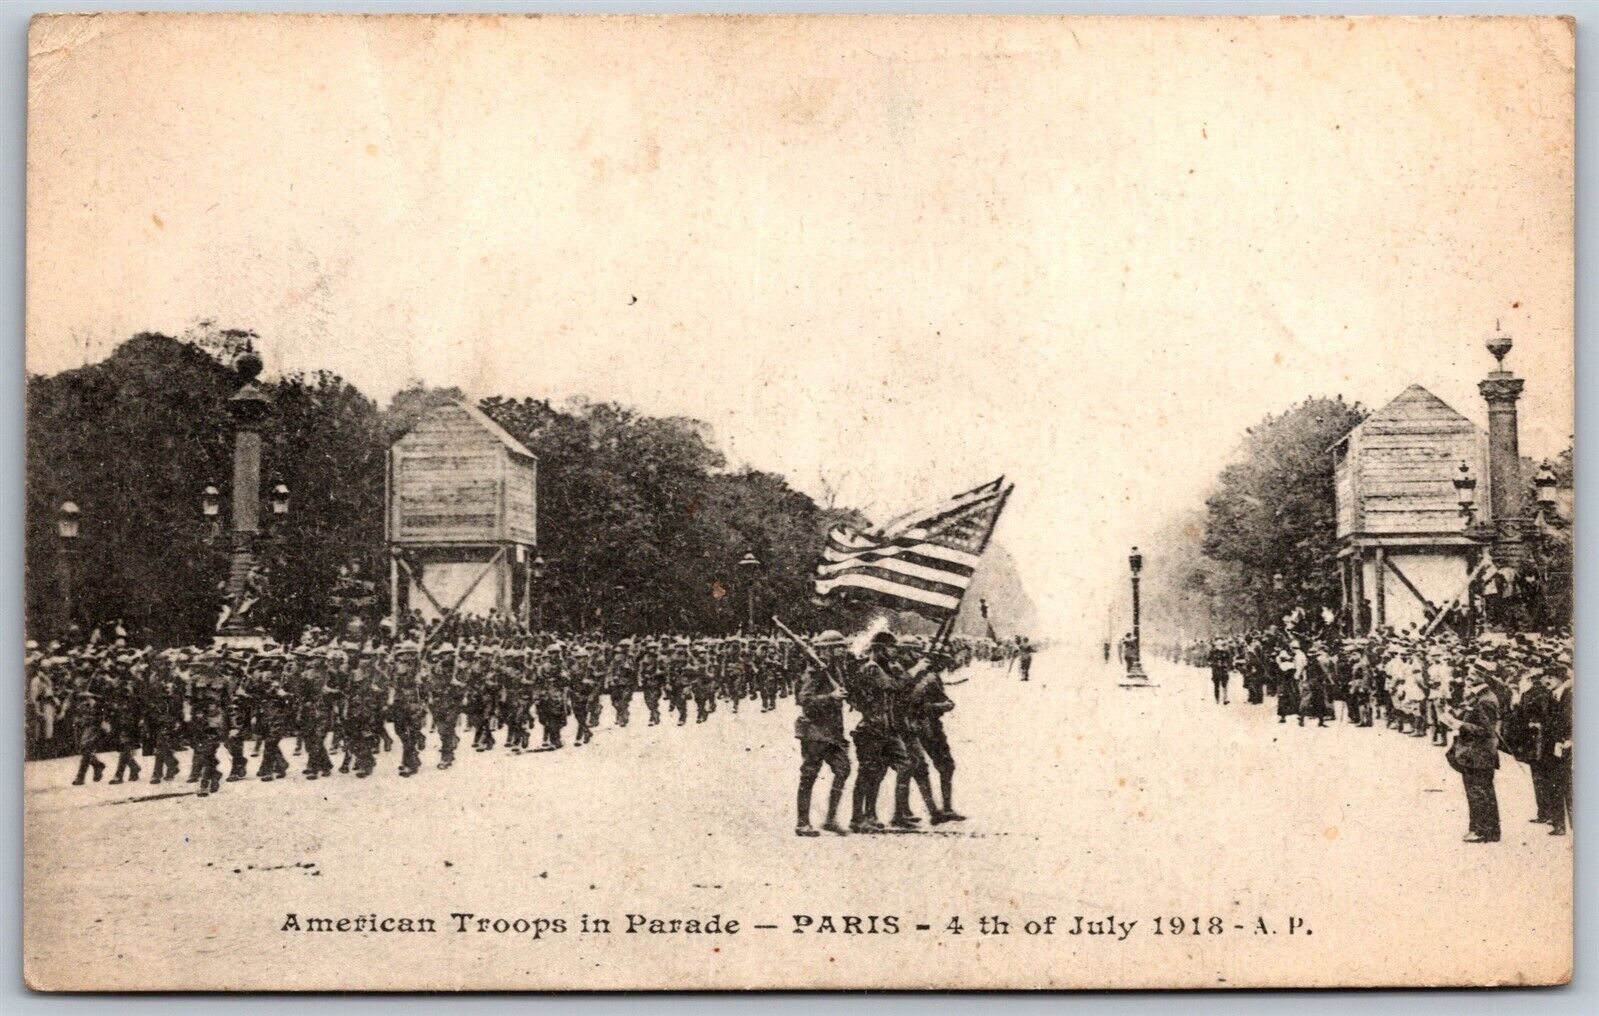 Vtg Military American Troops in Parade Paris France July 4th 1918 WW1 Postcard